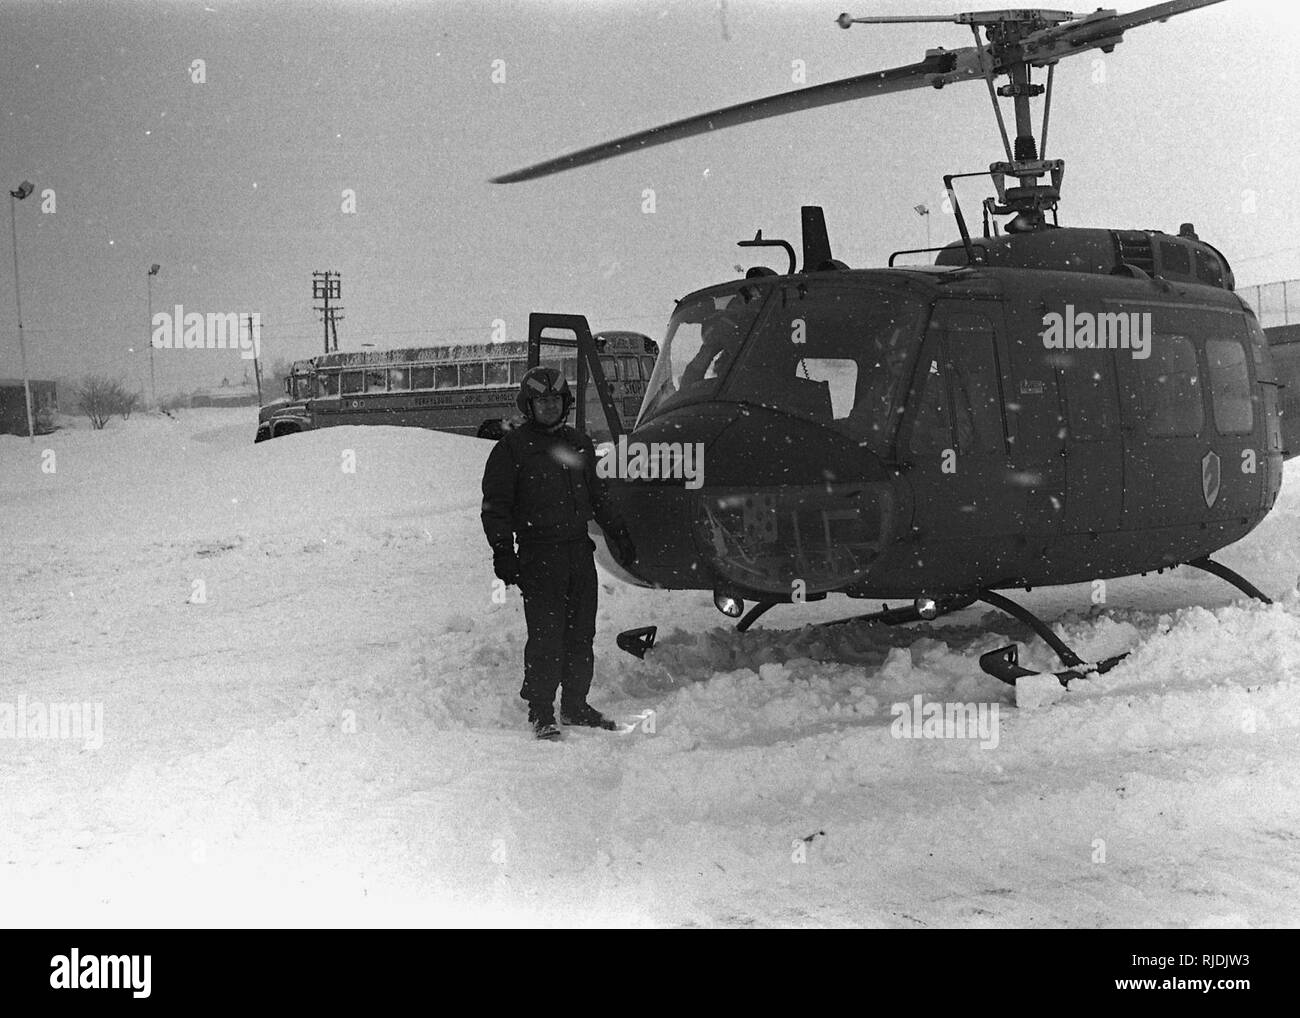 Sgt. James Monroe of Troop N, 107th Armored Cavalry stands outside of a UH-1 Iroquois “Huey” helicopter after it landed at Perrysburg High School, in Perrysburg, Ohio, during state active duty operations in support of the “Blizzard of ’78.” Ohio National Guard helicopter crews worked around the clock on medevac, rescue and resupply missions, averaging more than 200 flights a day during the peak period. (Ohio Army National Guard Historical Collections) Stock Photo